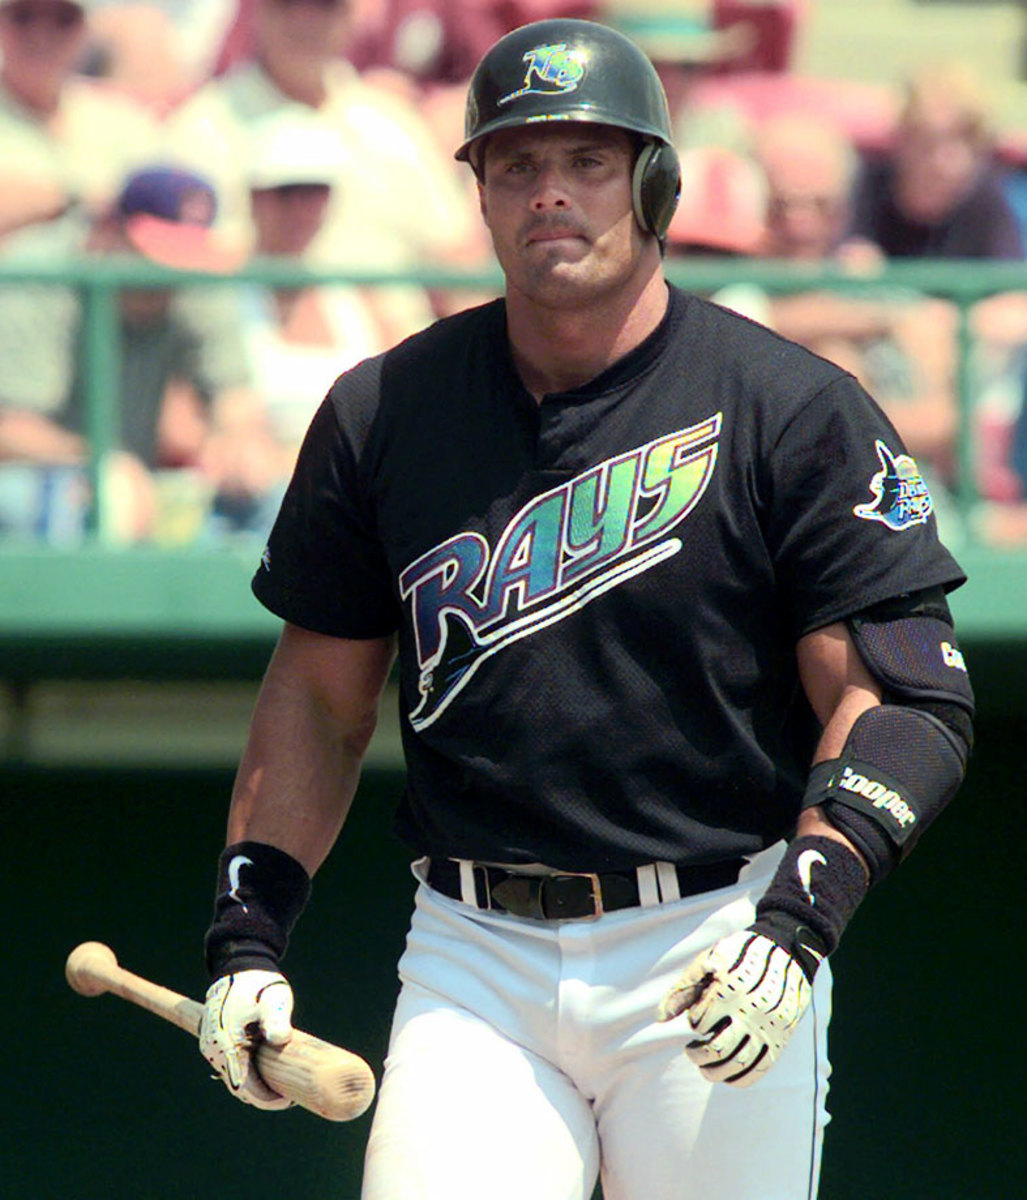 Tampa-Bay-Devil-Rays-uniform-1999-Jose-Canseco.jpg